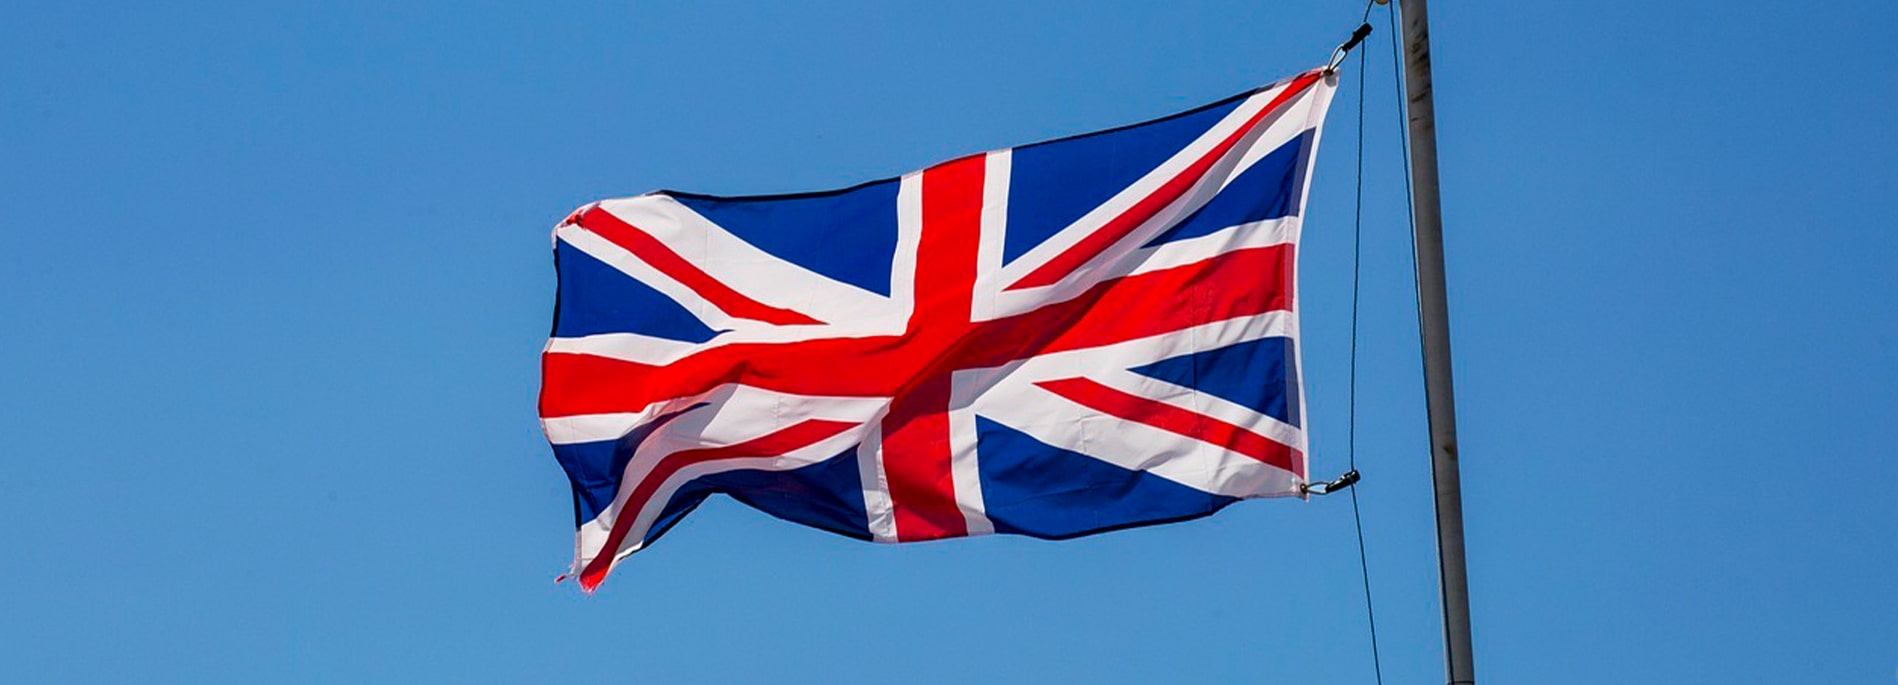 Flag of Union Jack flapping in the wind